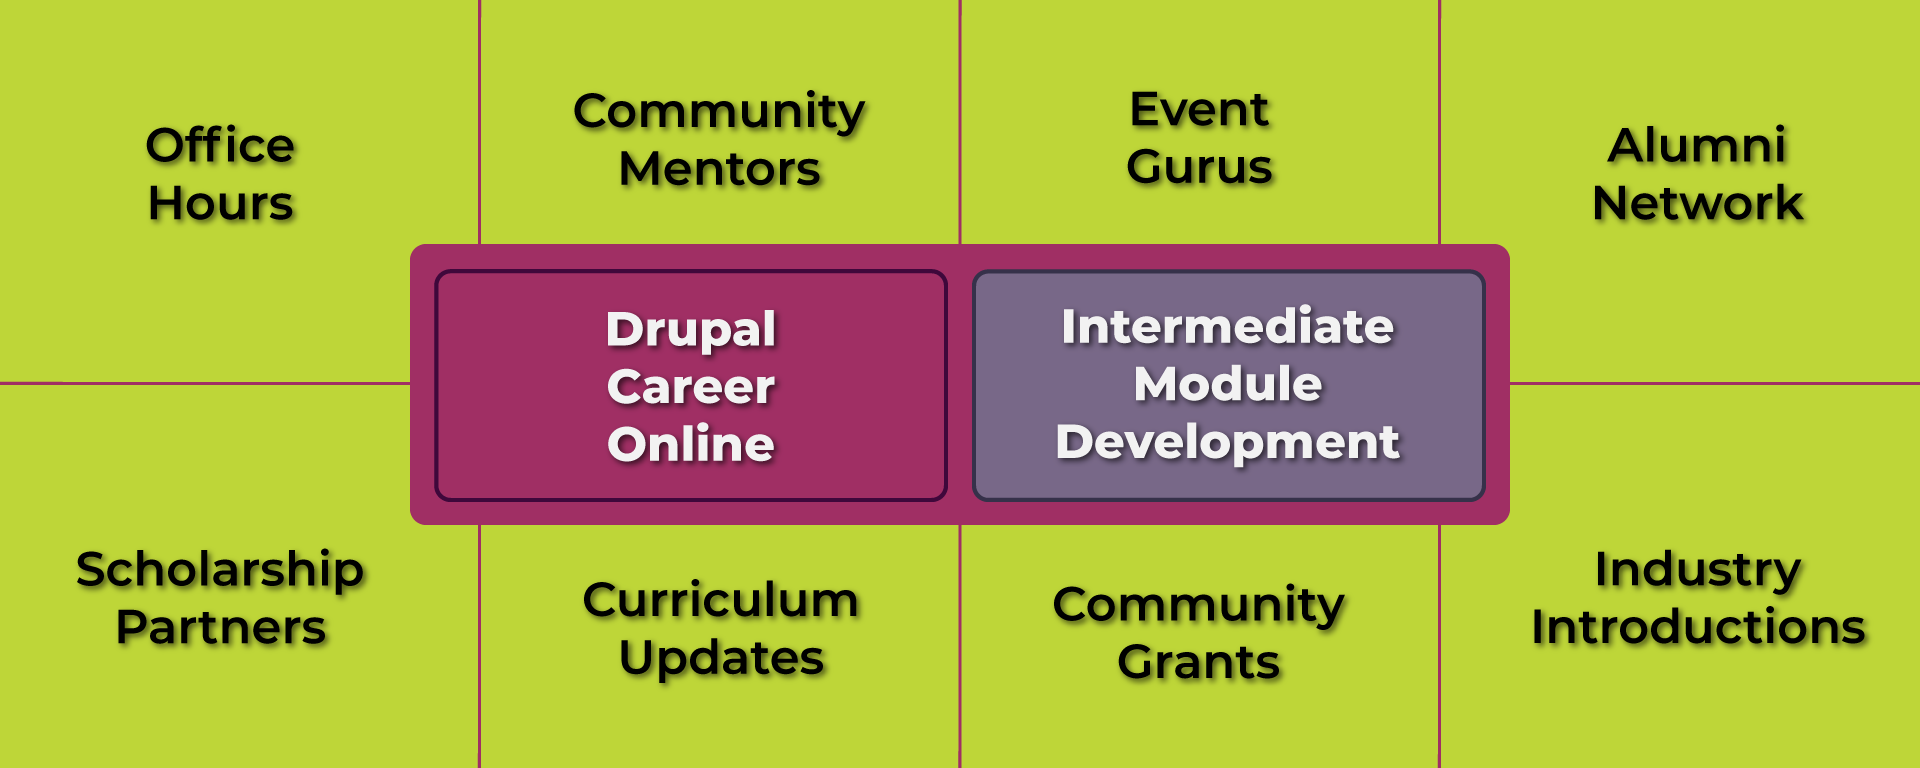 Learning community image showing list of supporting aspects.